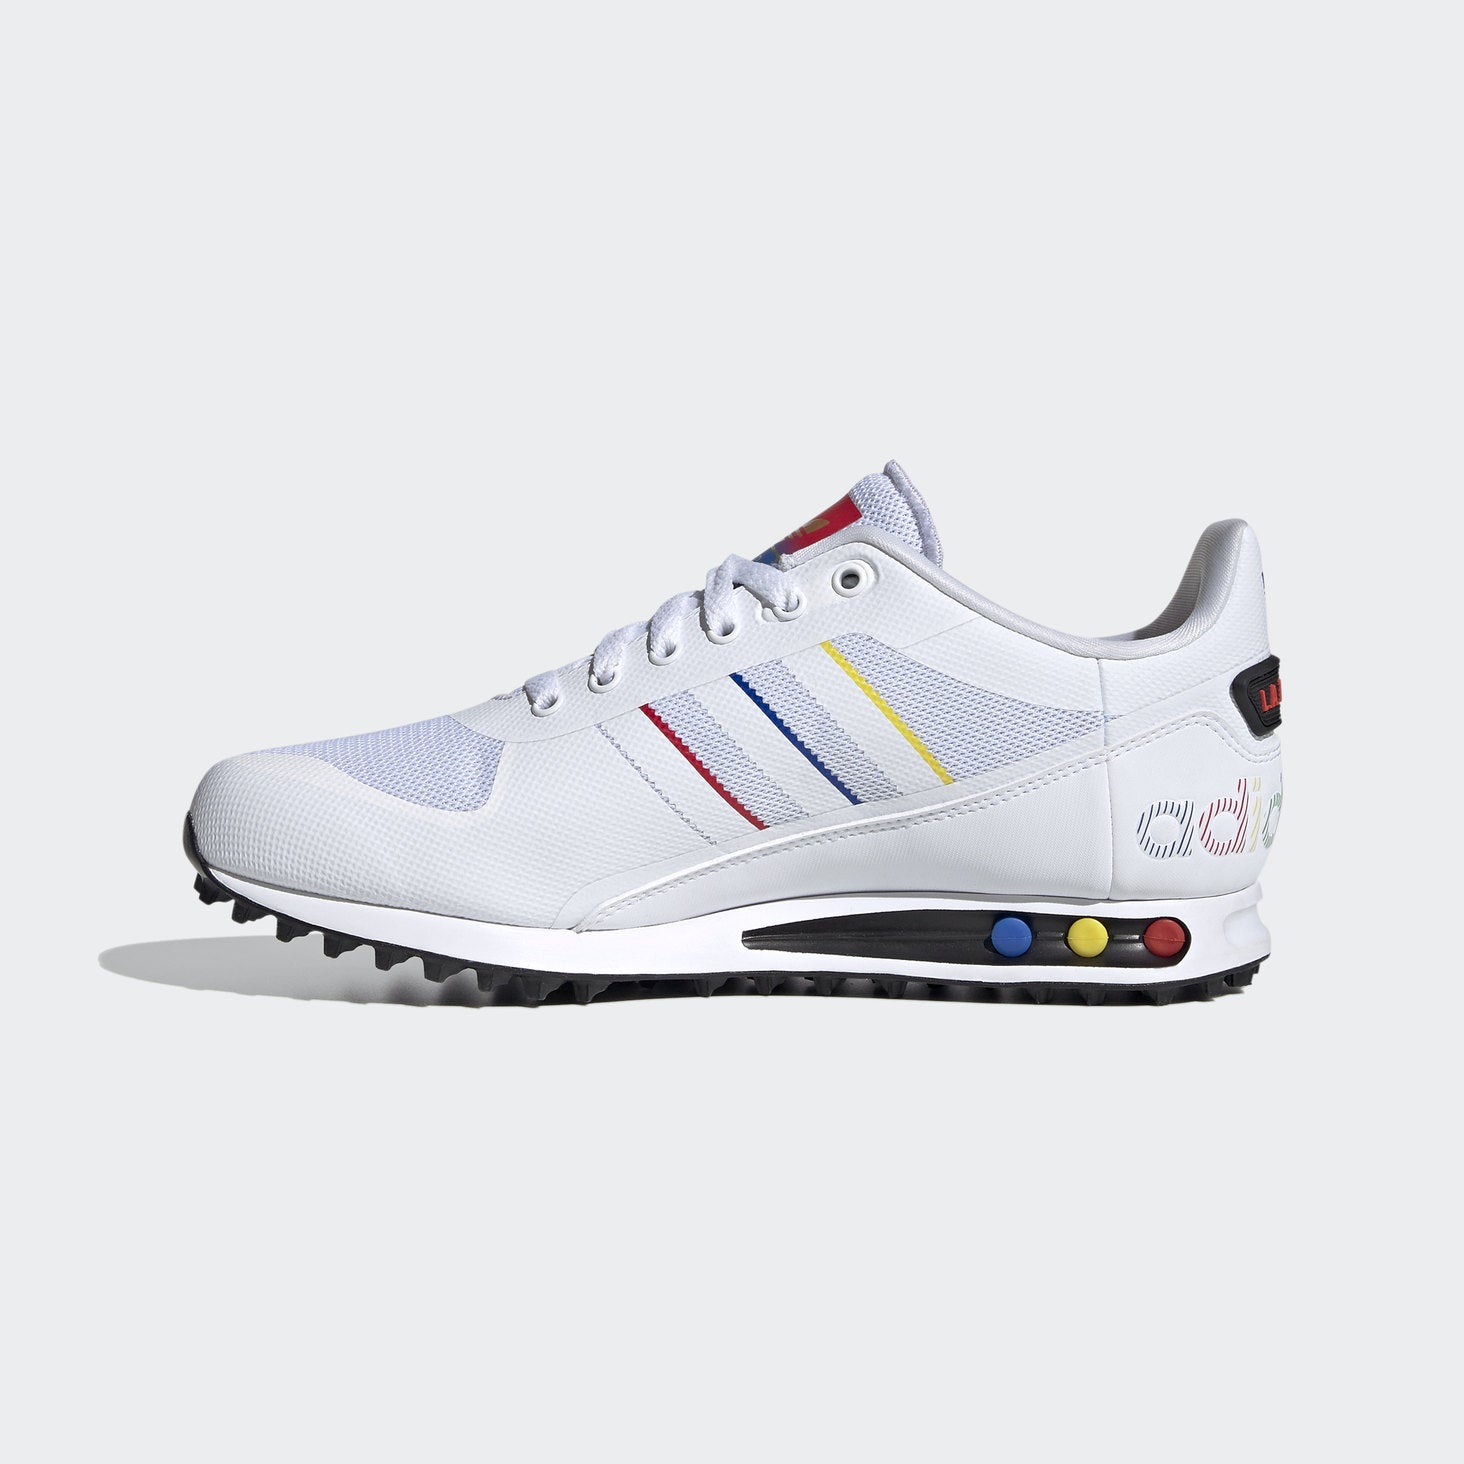 LA II in White/Blue/Red | Find Your Sole